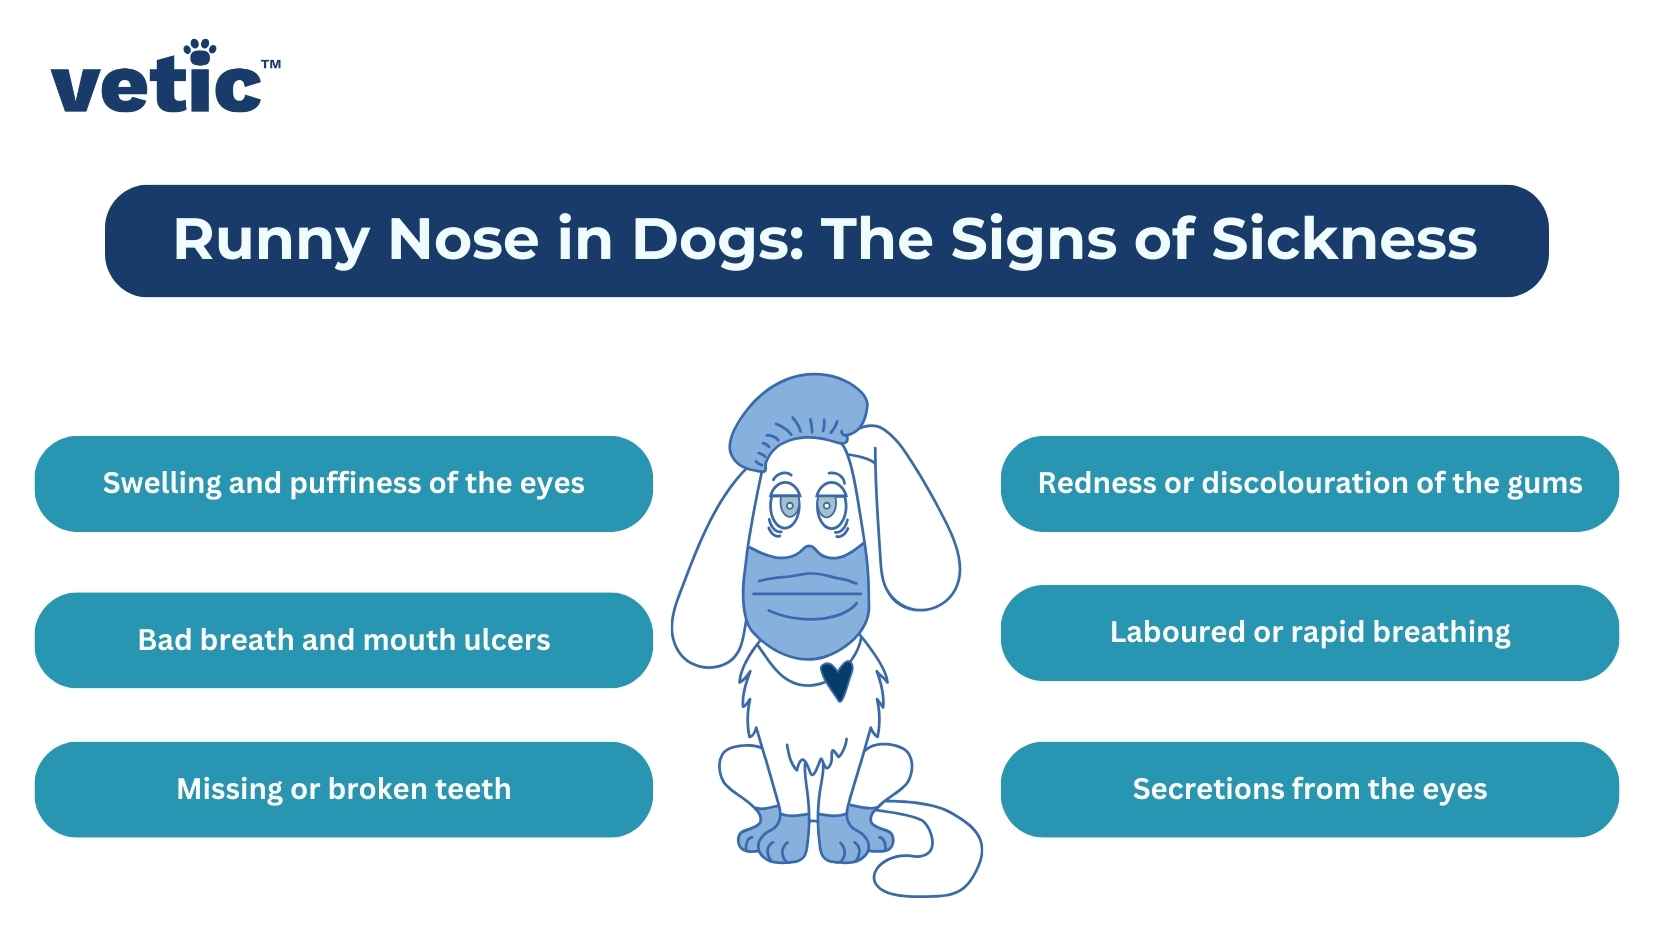 Runny Nose in Dogs: The signs of Sickness Swelling and puffiness of the eyes Bad breath Missing or broken teeth Redness or discolouration of the gums Laboured or rapid breathing Secretions from the eyes